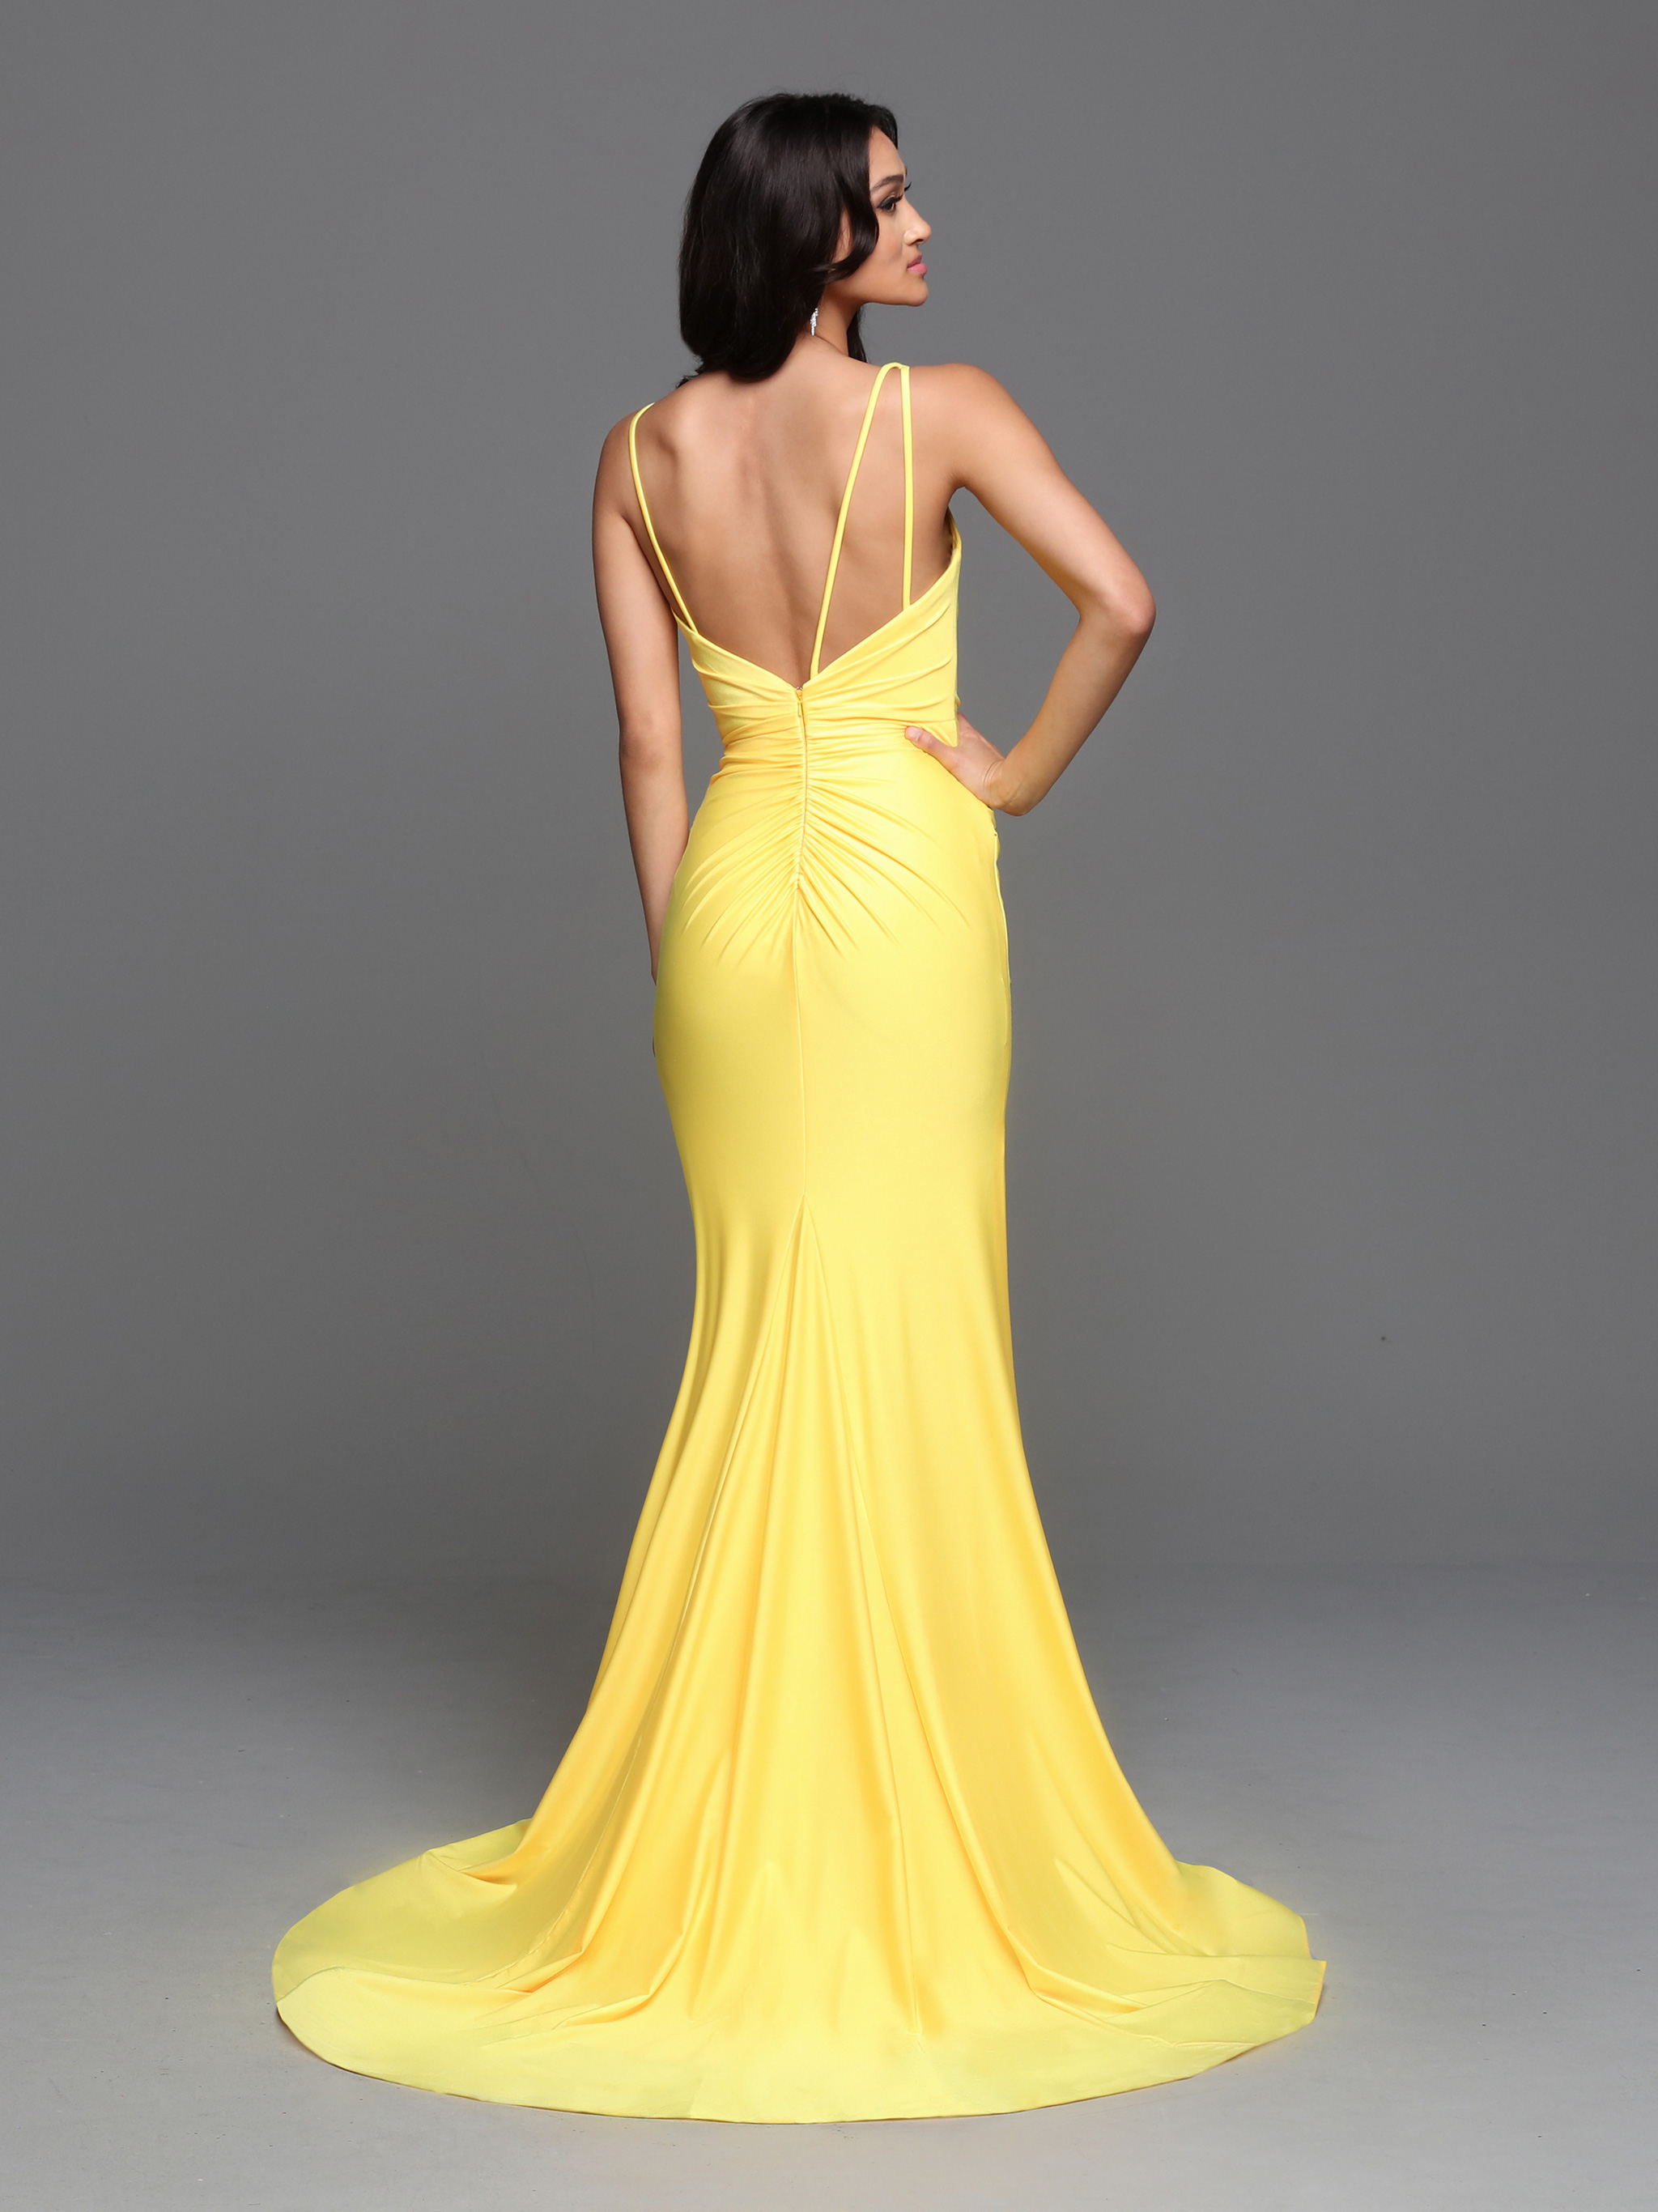 Image showing back view of style #72287